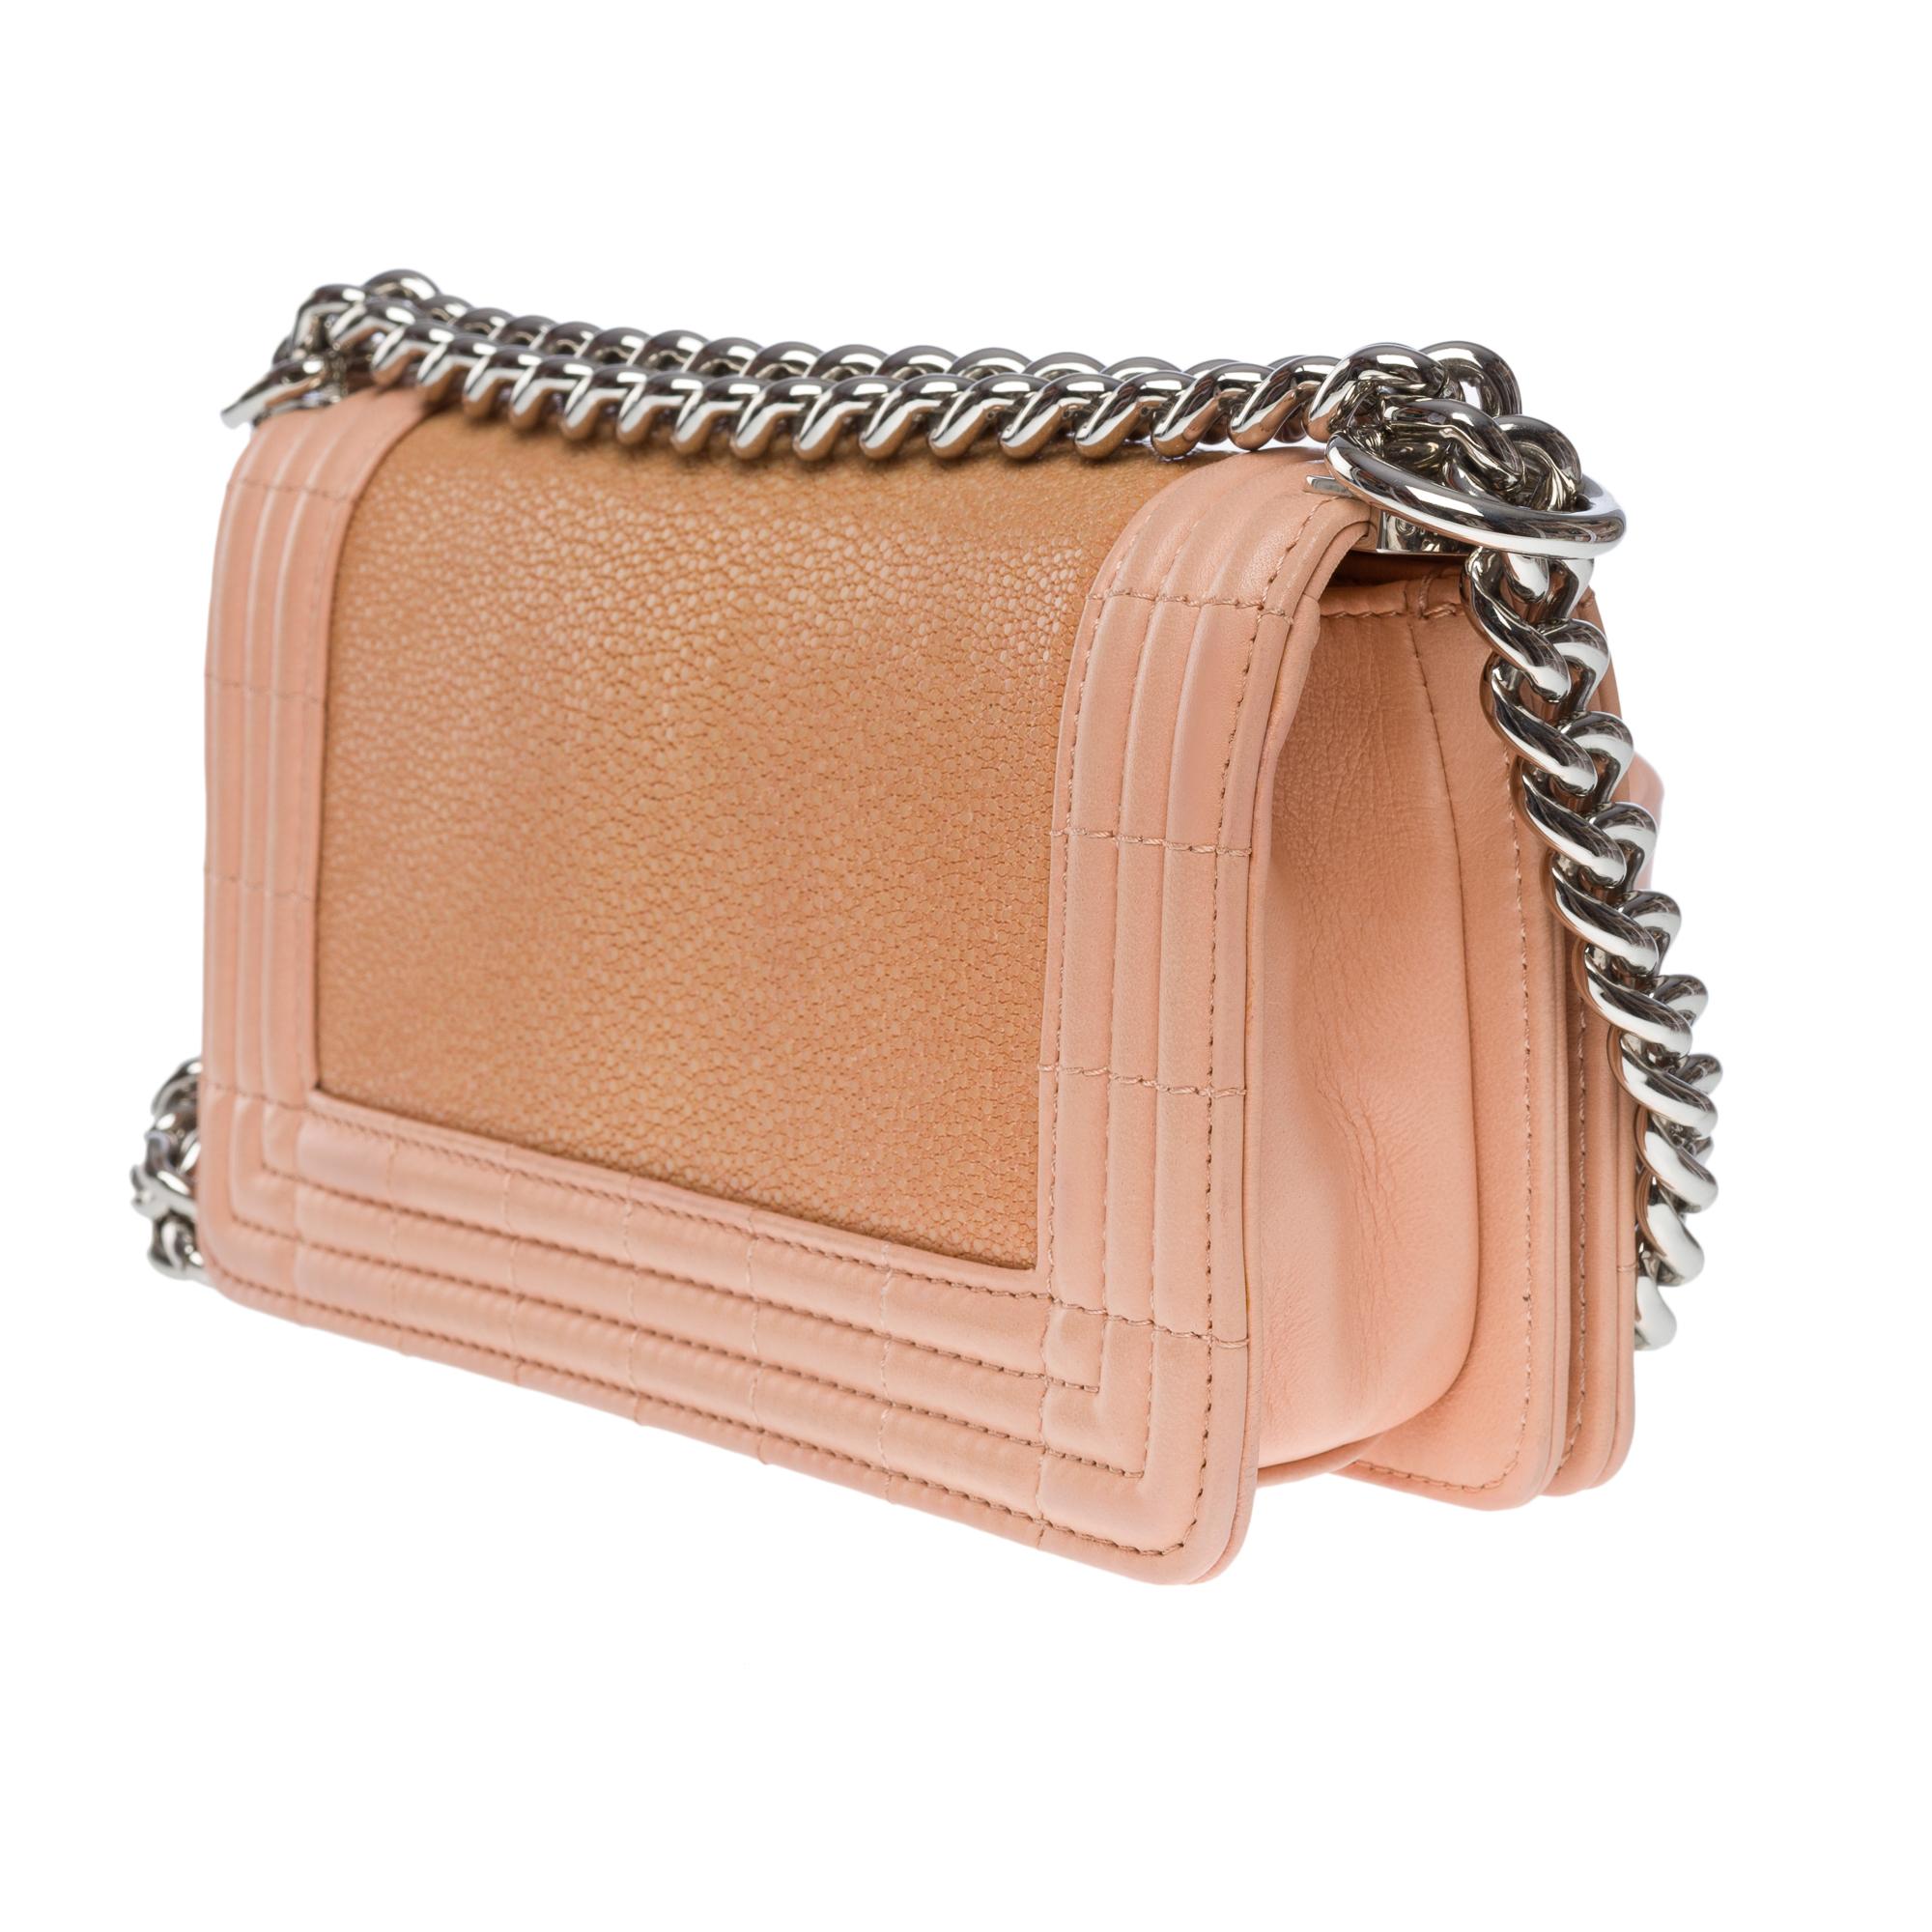 Limited Edition Chanel Boy Mini shoulder bag in Pink shagreen and leather, SHW For Sale 1